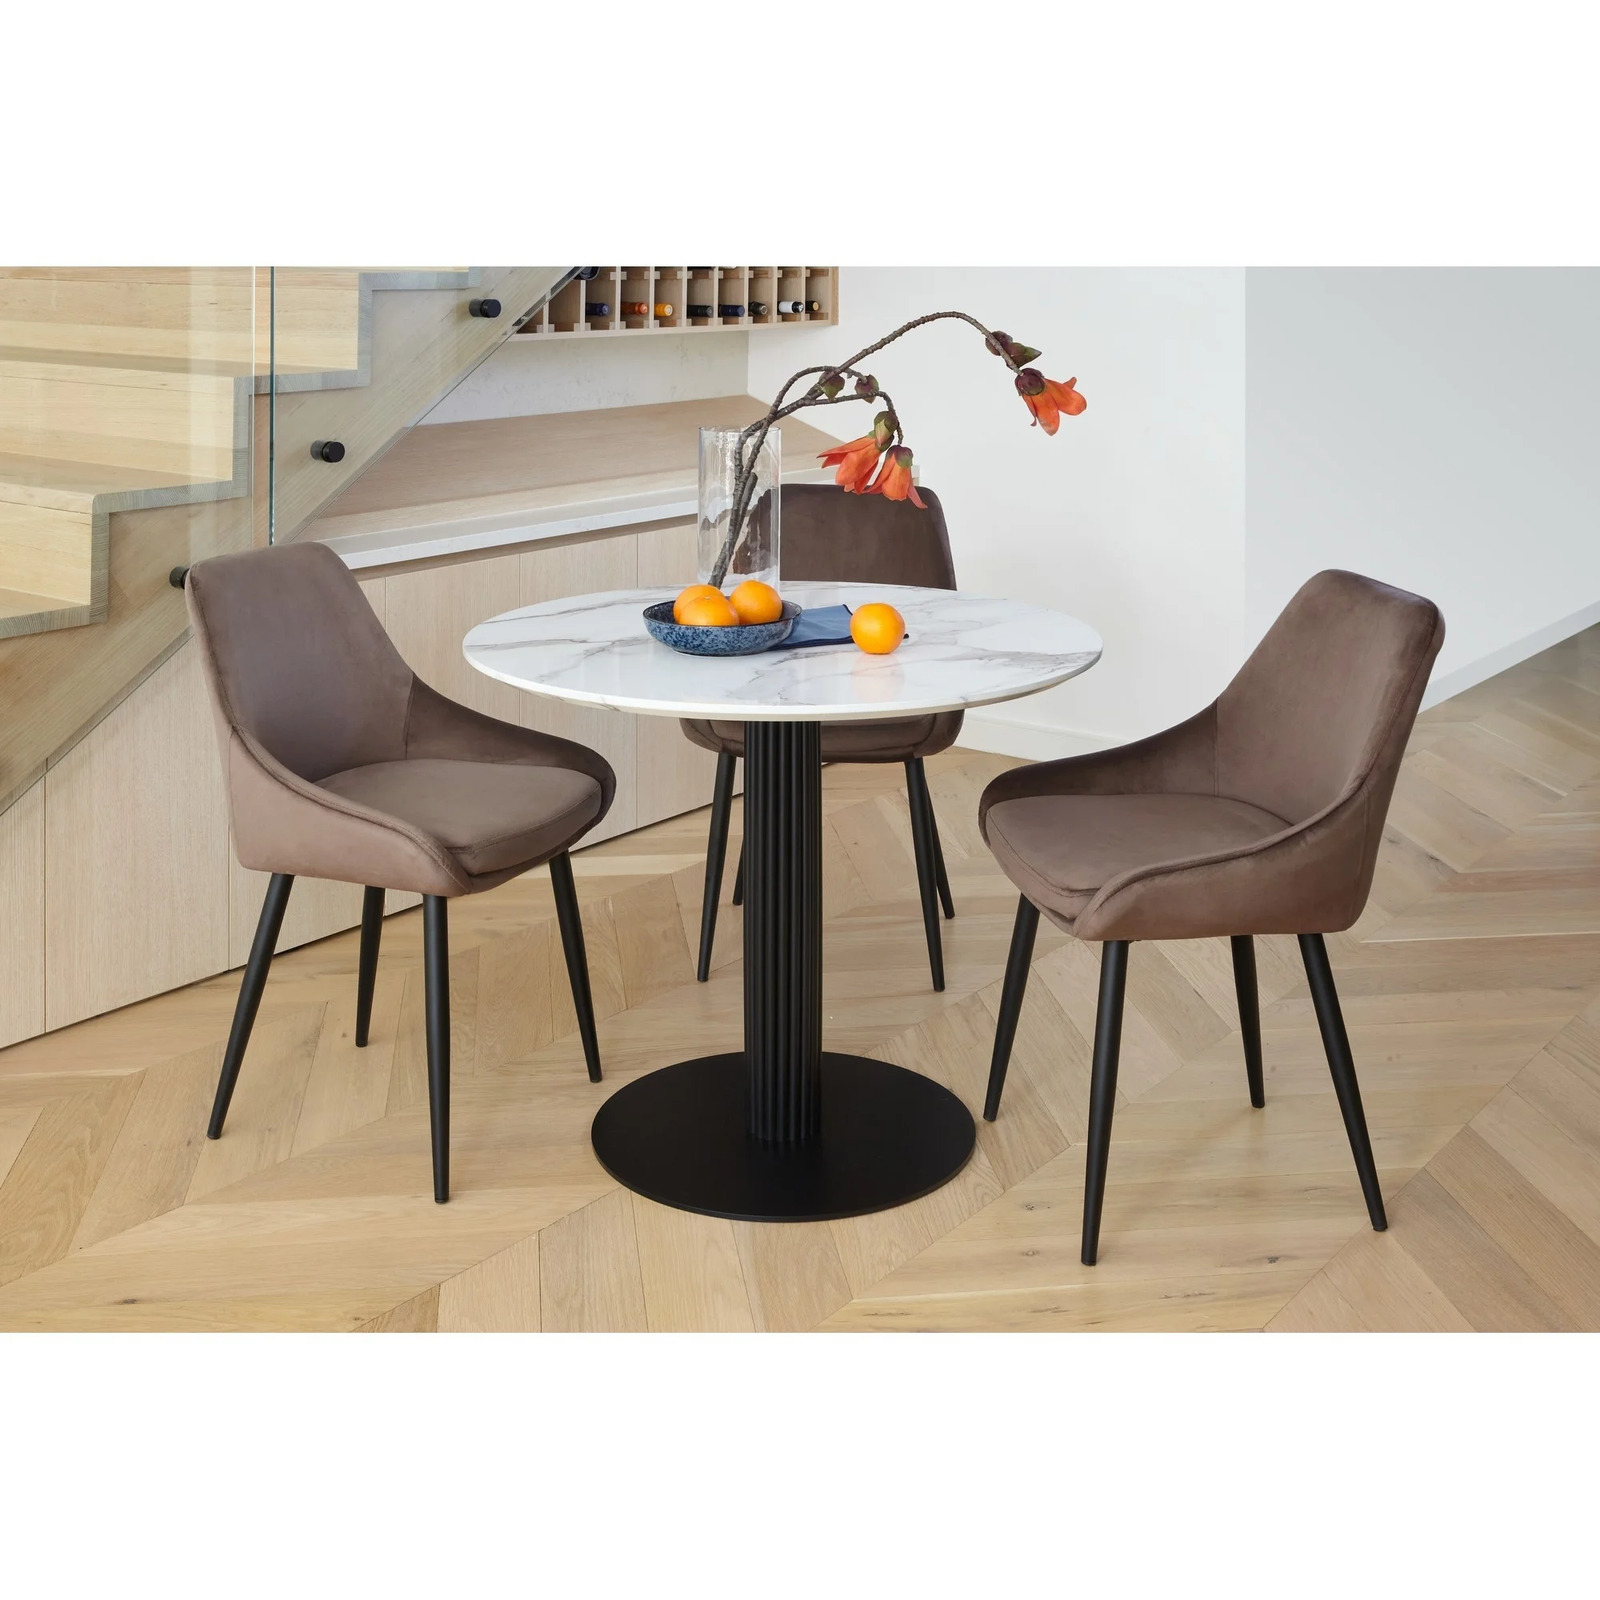 Martini Marble Effect Round Dining Table